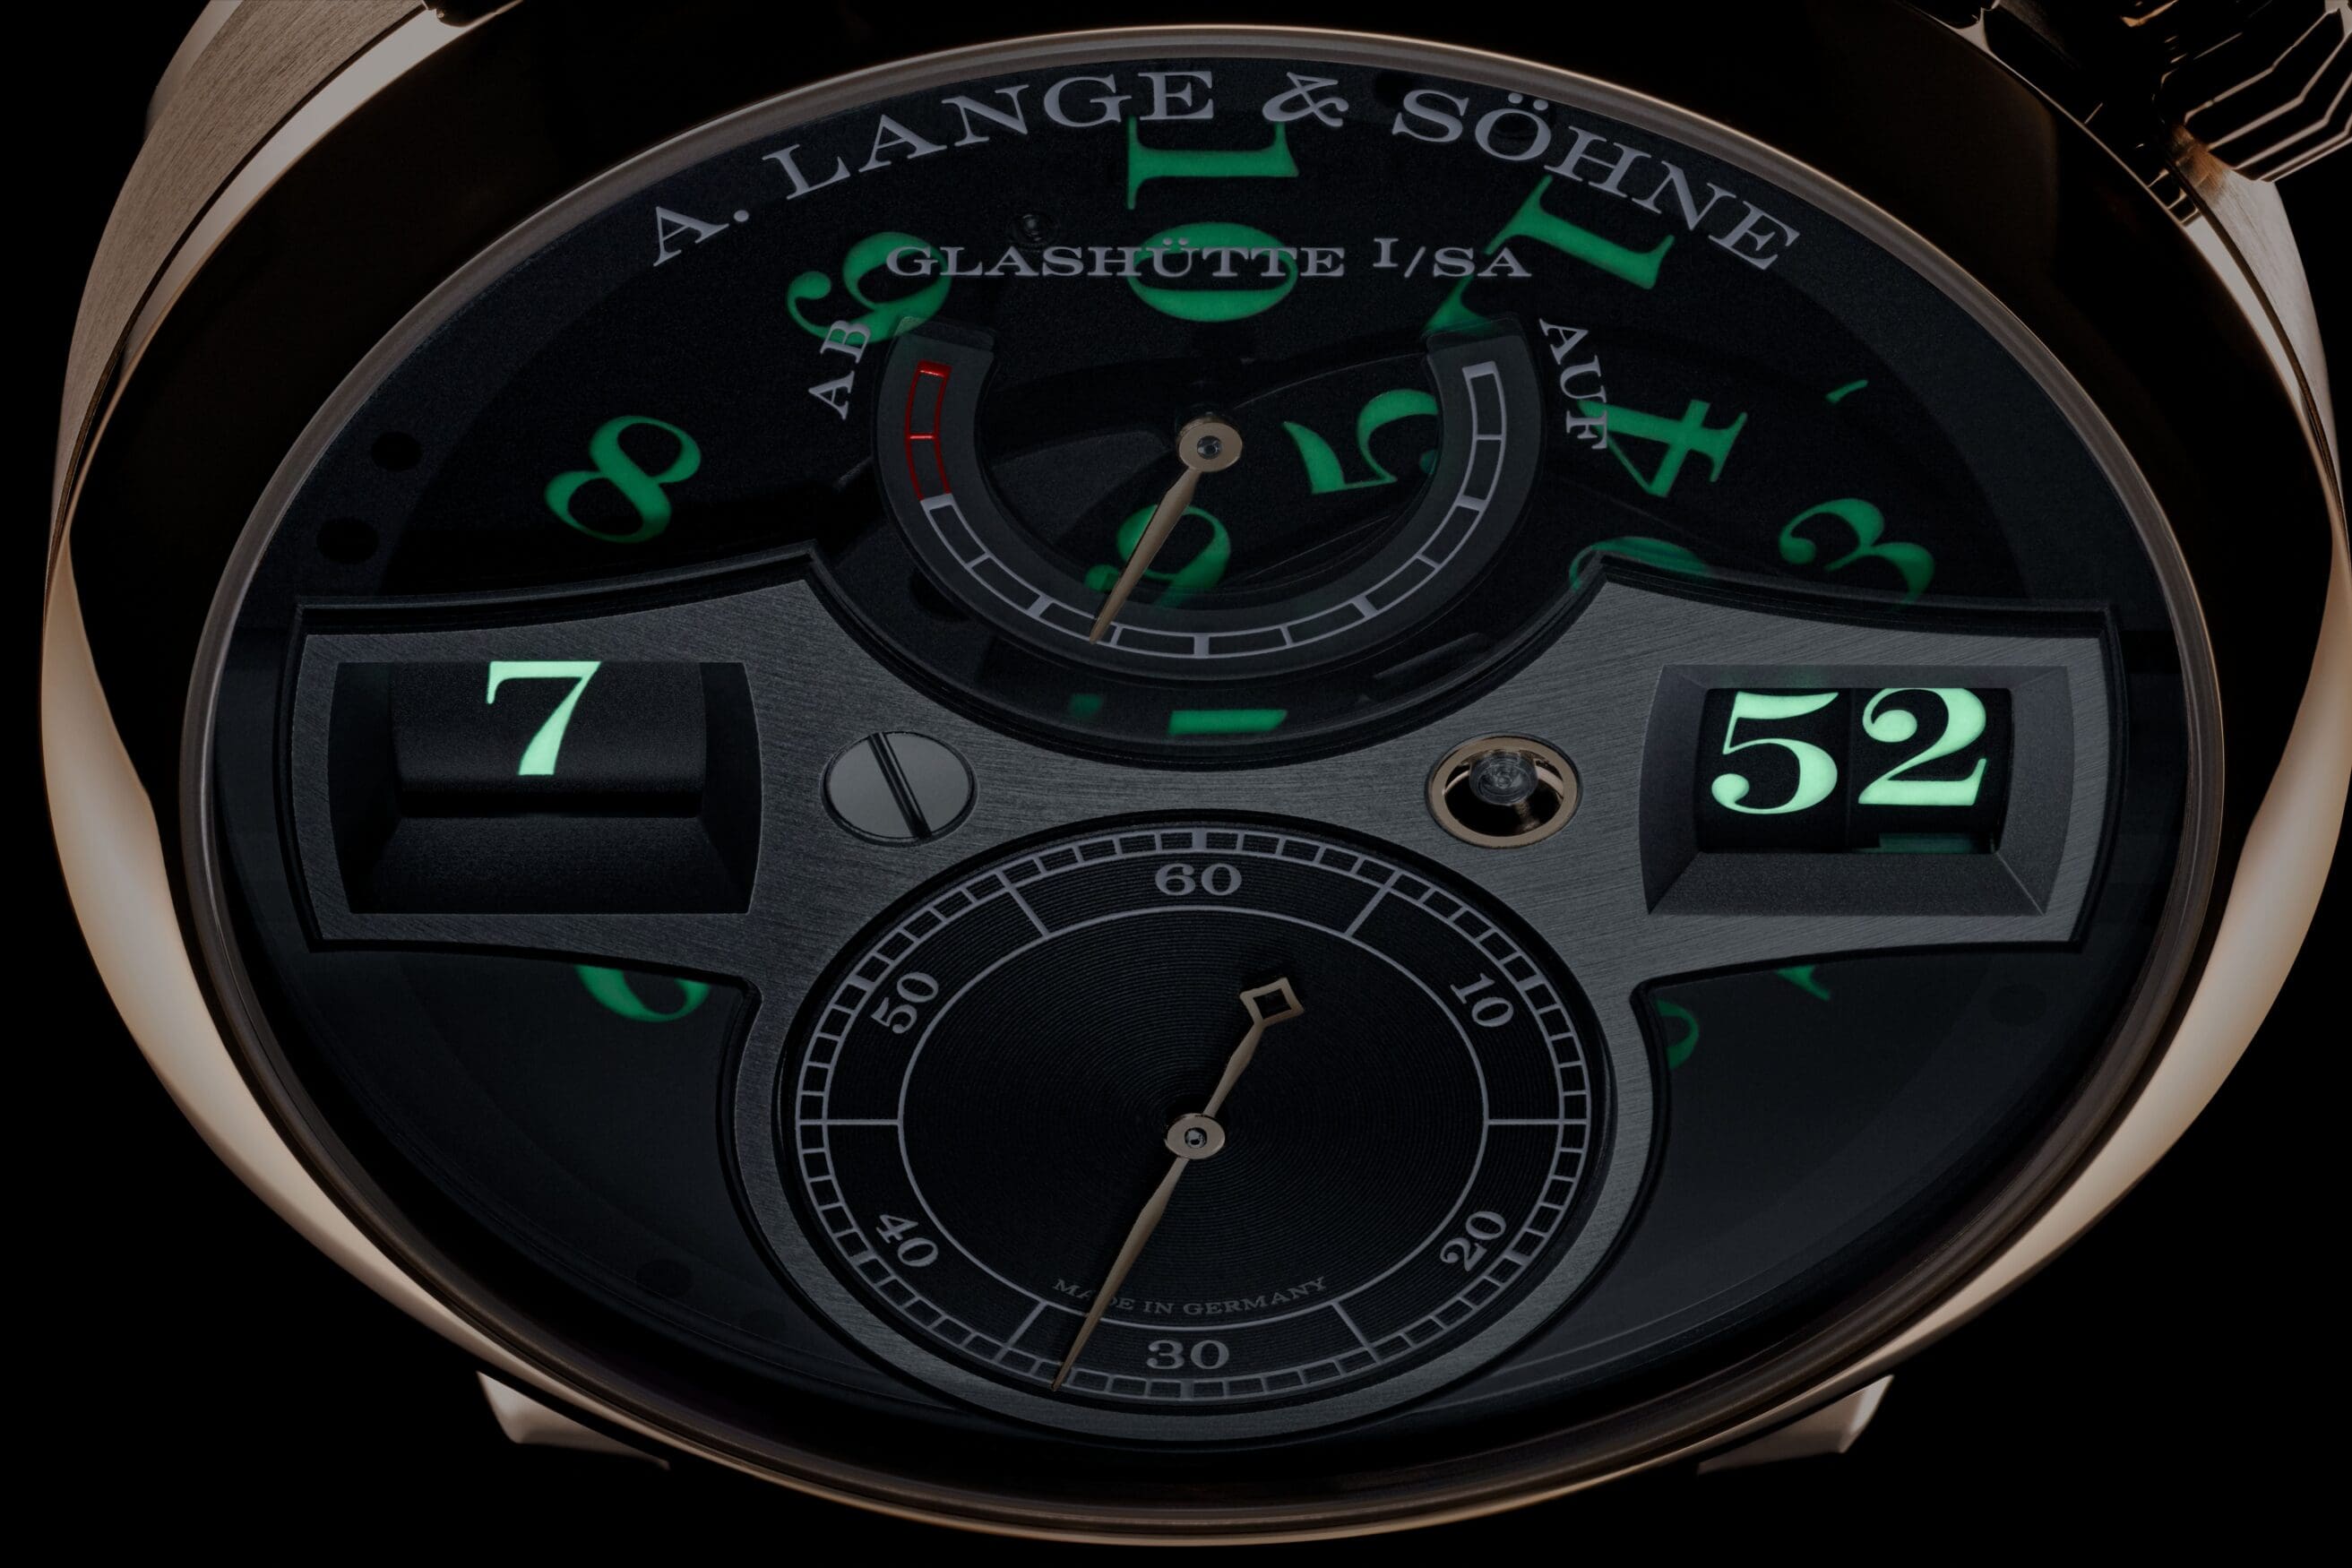 THE IMMORTALS – The A. Lange & Söhne Zeitwerk is a truly high-end digital watch